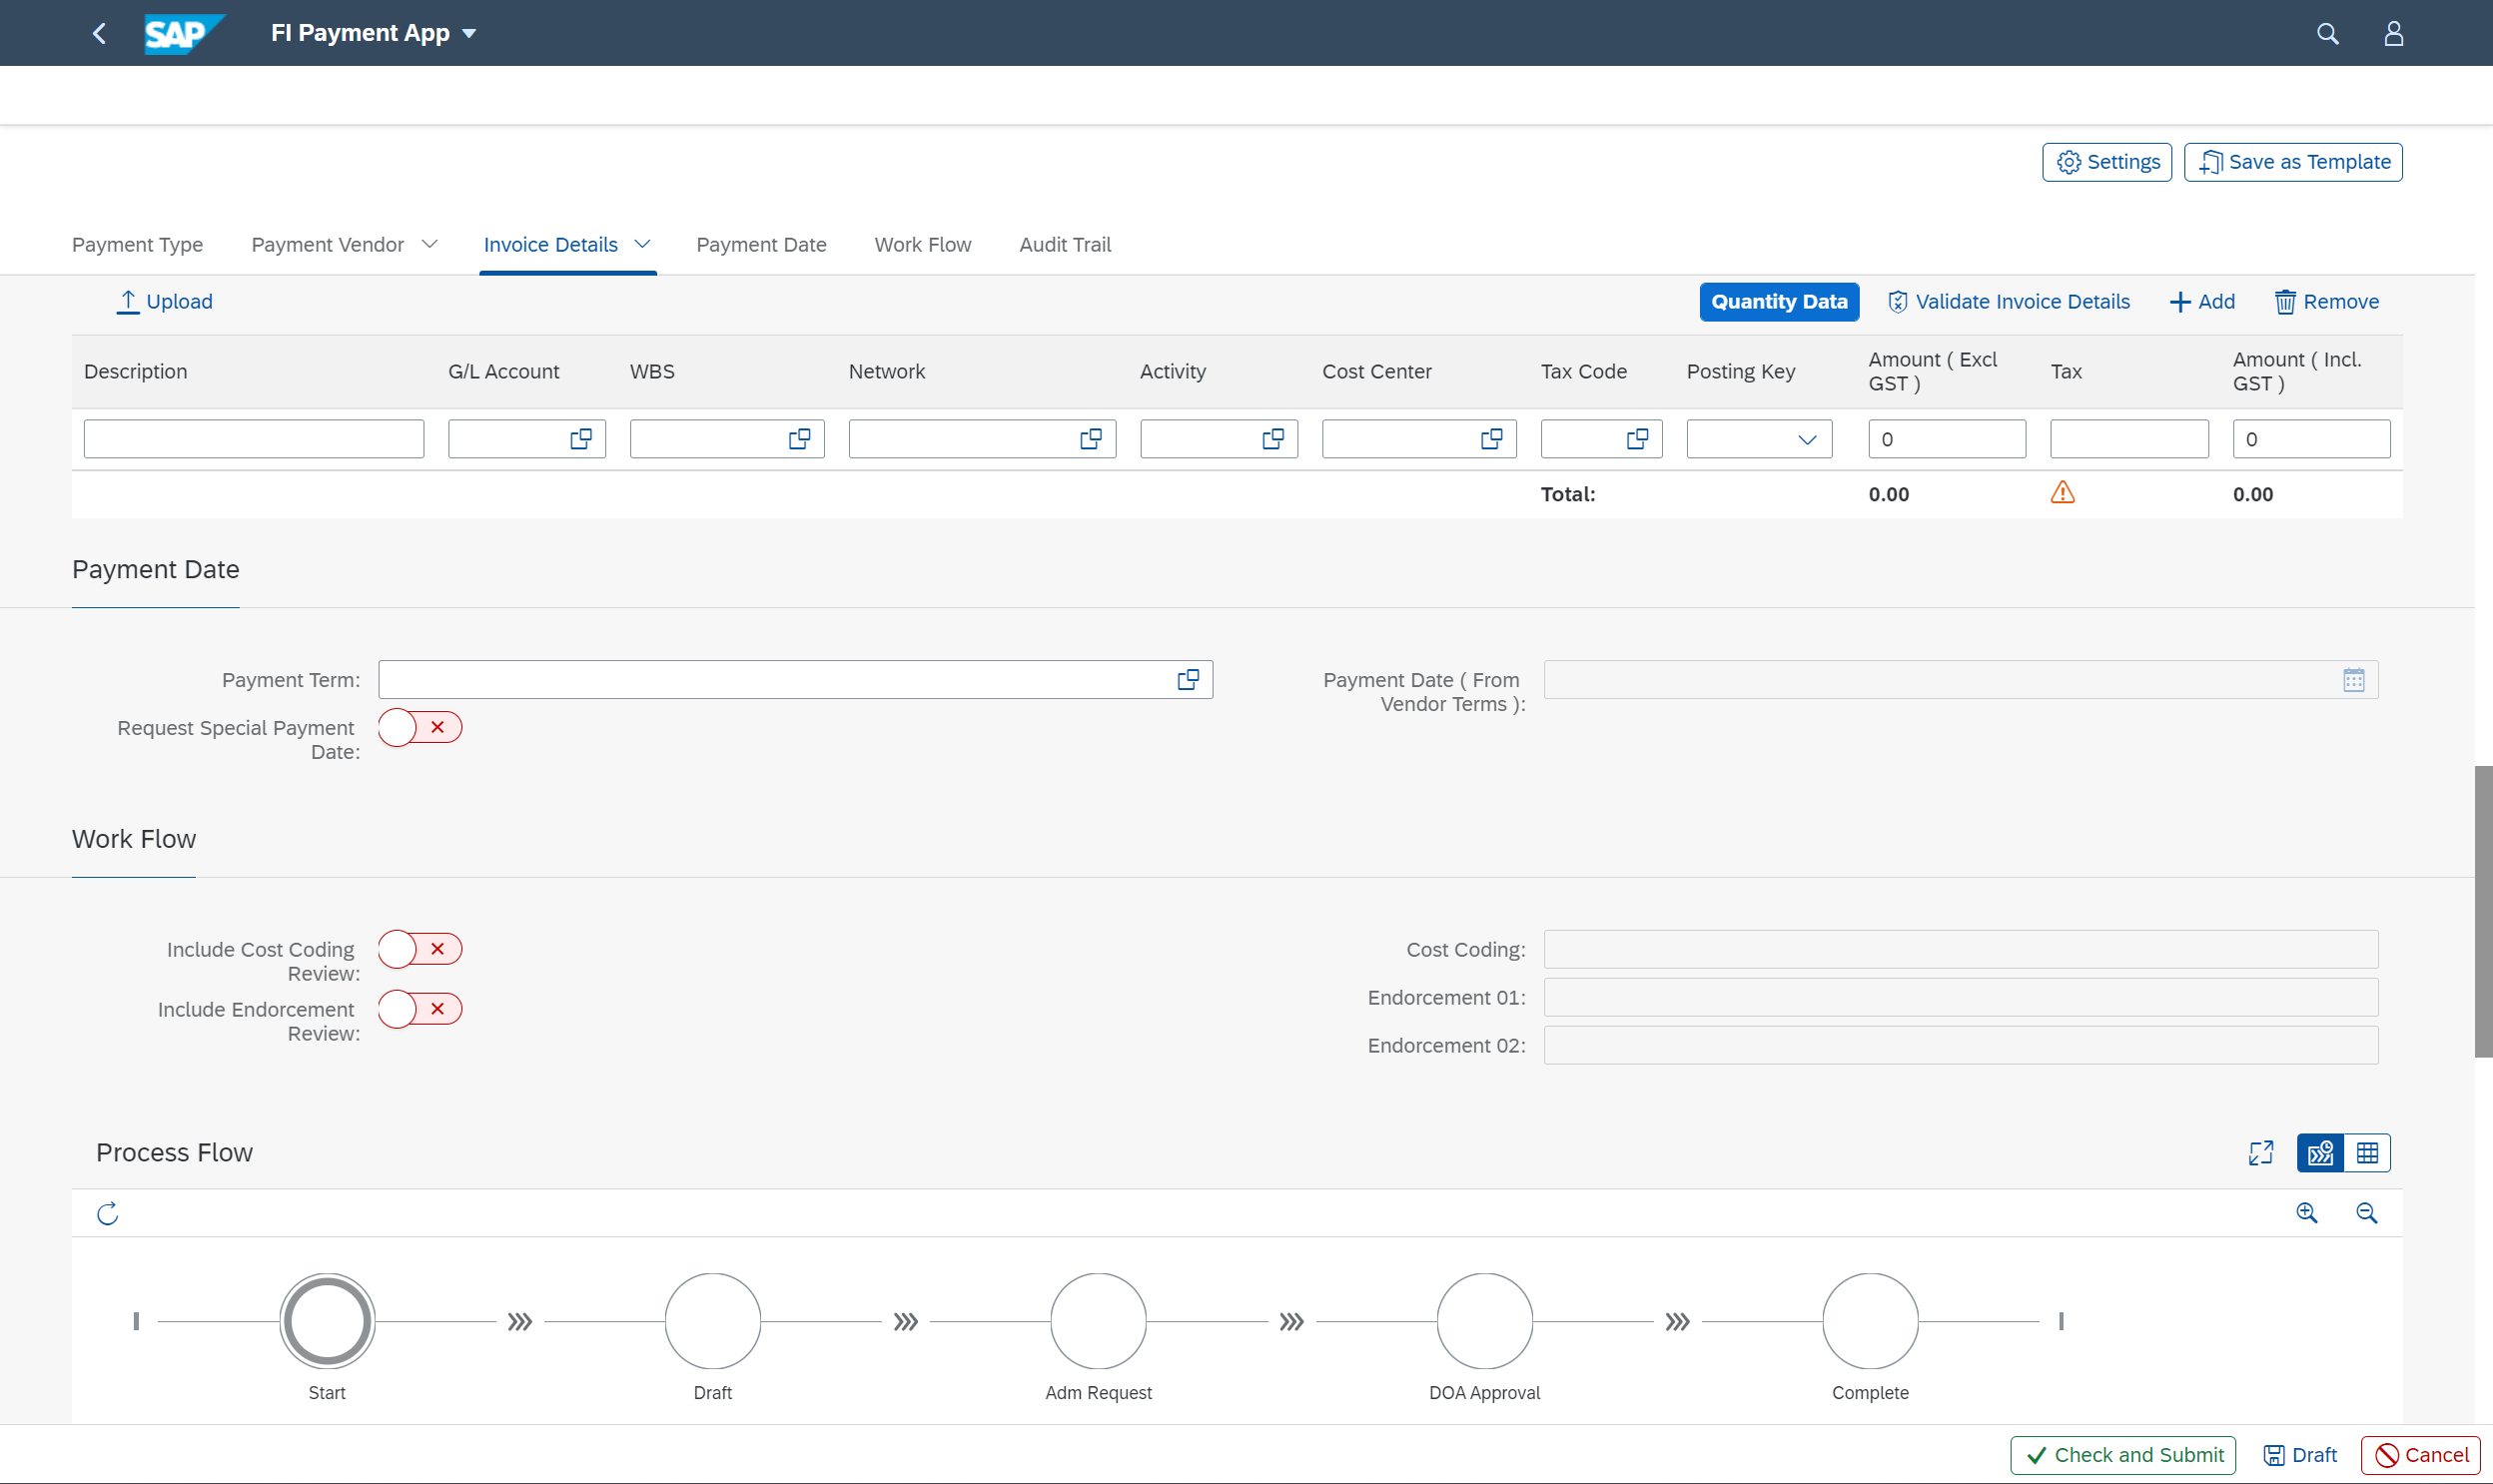 Invoice Approval and Non-PO Payments SAP Fiori App - Project Procurement